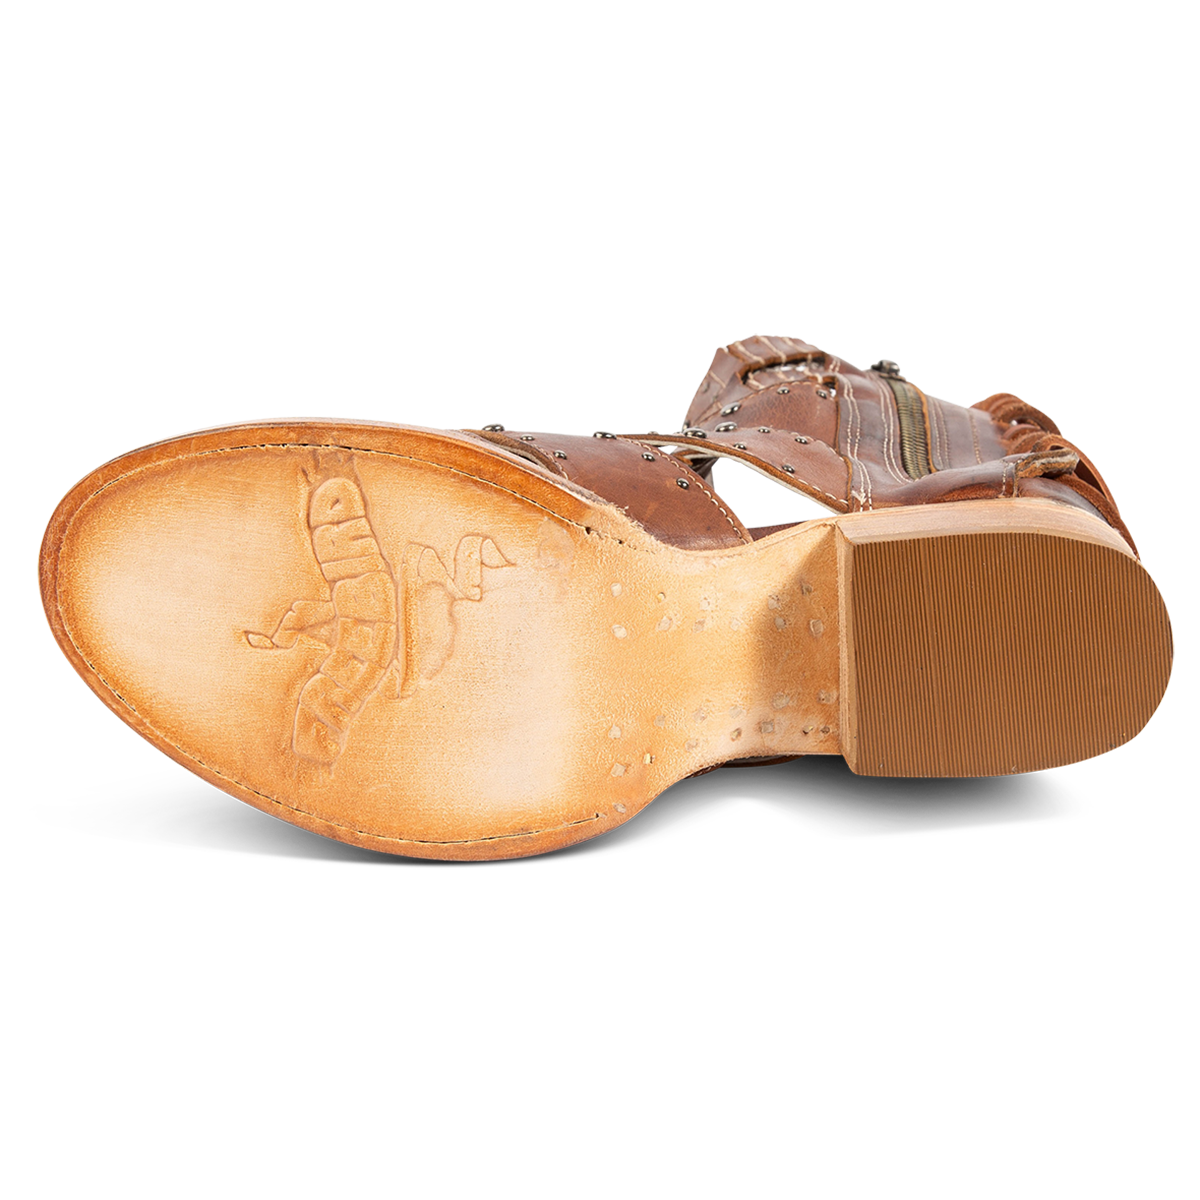 Leather sole imprinted with FREEBIRD on women's Ghost tan leather sandal